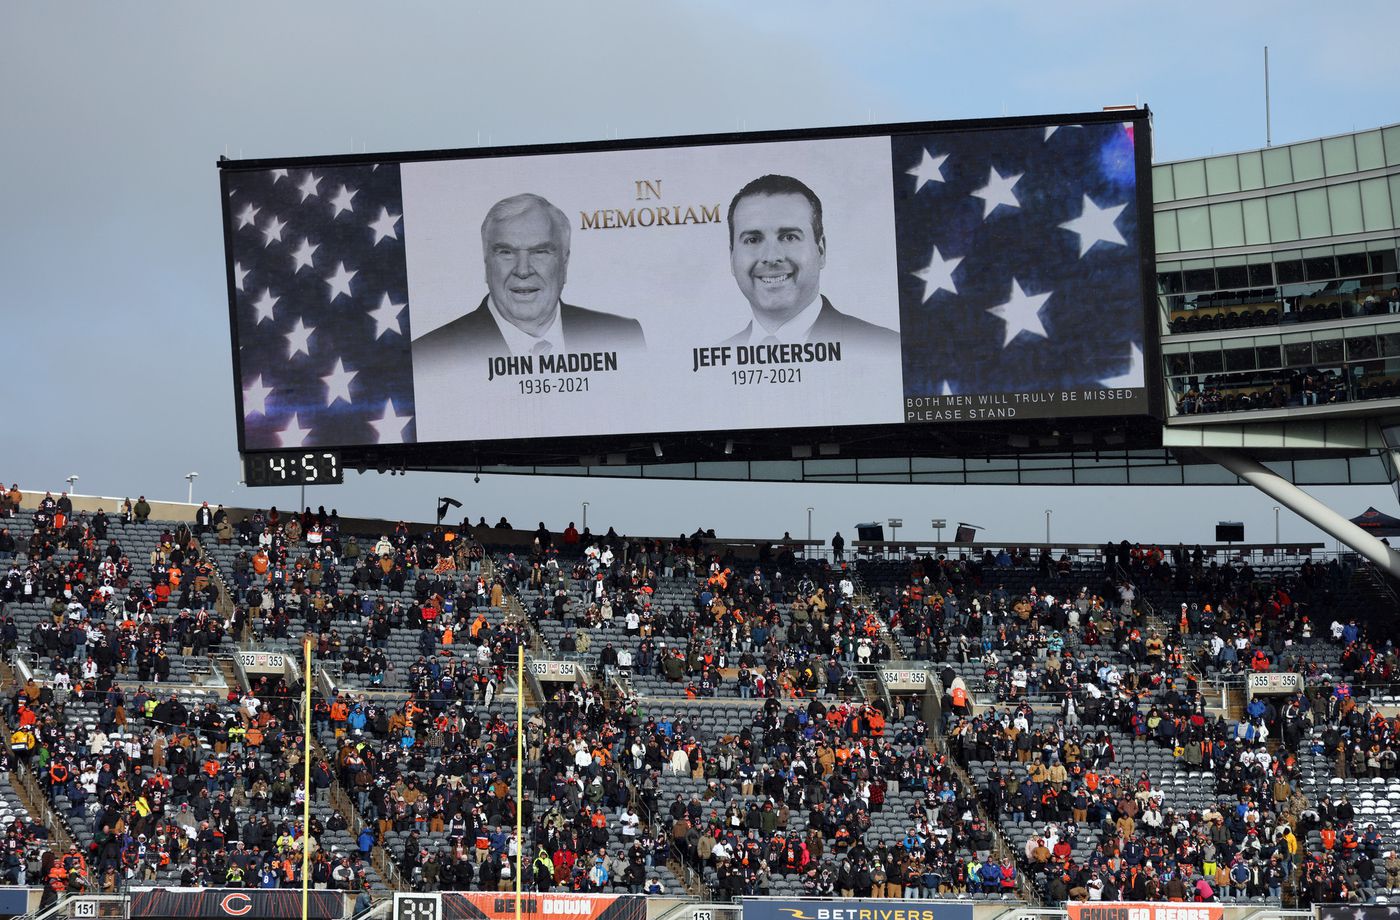 John Madden and Jeff Dickerson are honored before the Bears and Giants play on Jan. 2, 2022 at Soldier Field.